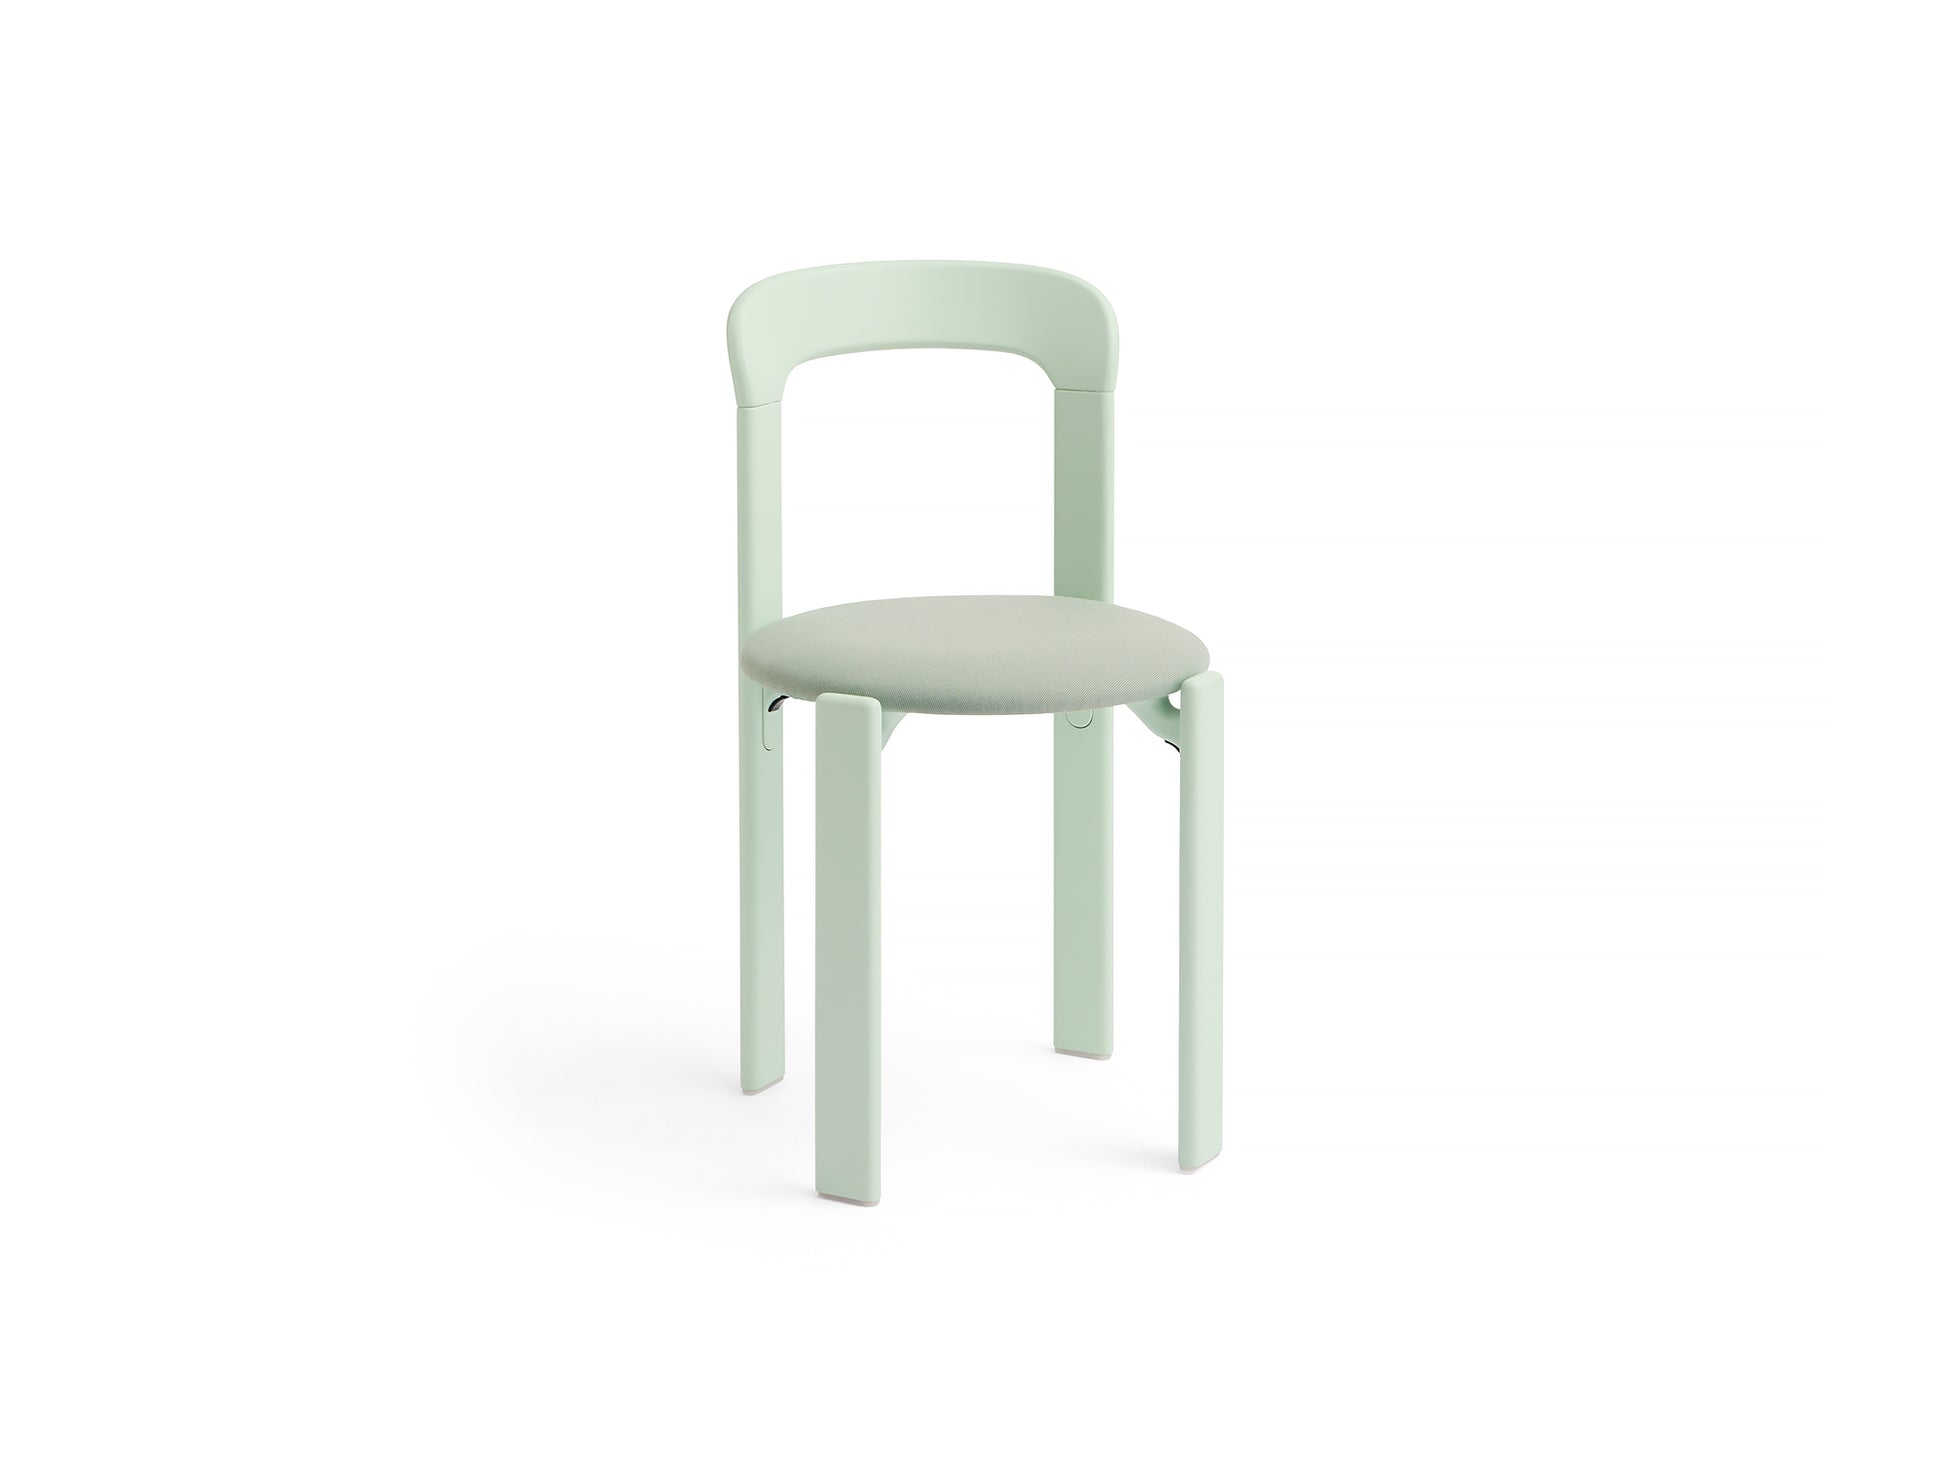 Rey Chair Upholstered by HAY - Soft Mint Lacquered Beech / Relate 921